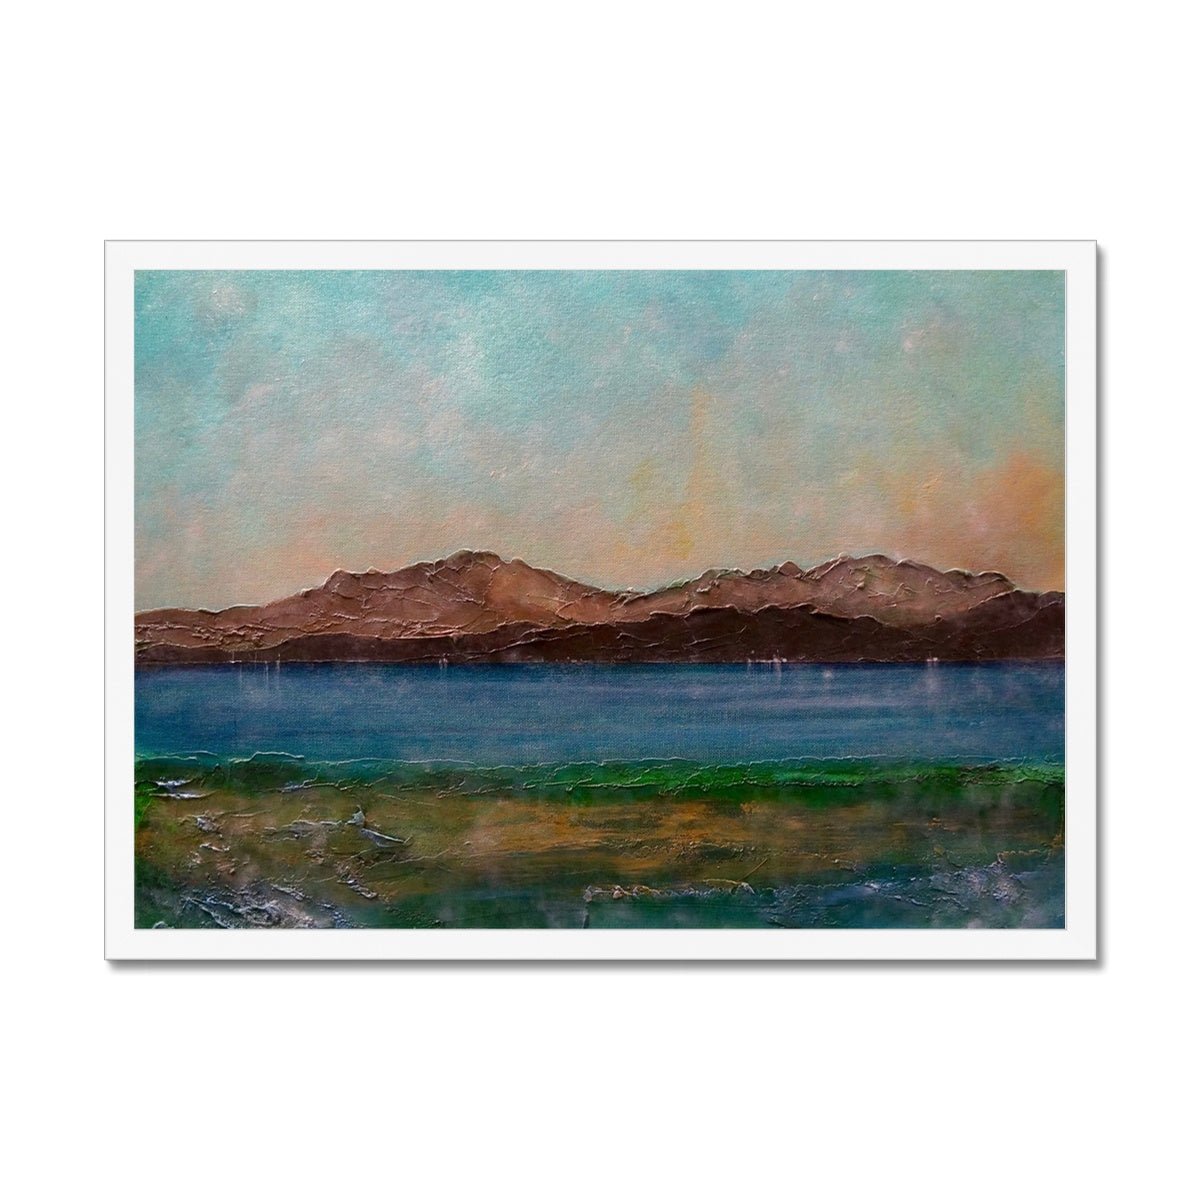 Arran From Scalpsie Bay Painting | Framed Prints From Scotland-Framed Prints-Arran Art Gallery-A2 Landscape-White Frame-Paintings, Prints, Homeware, Art Gifts From Scotland By Scottish Artist Kevin Hunter